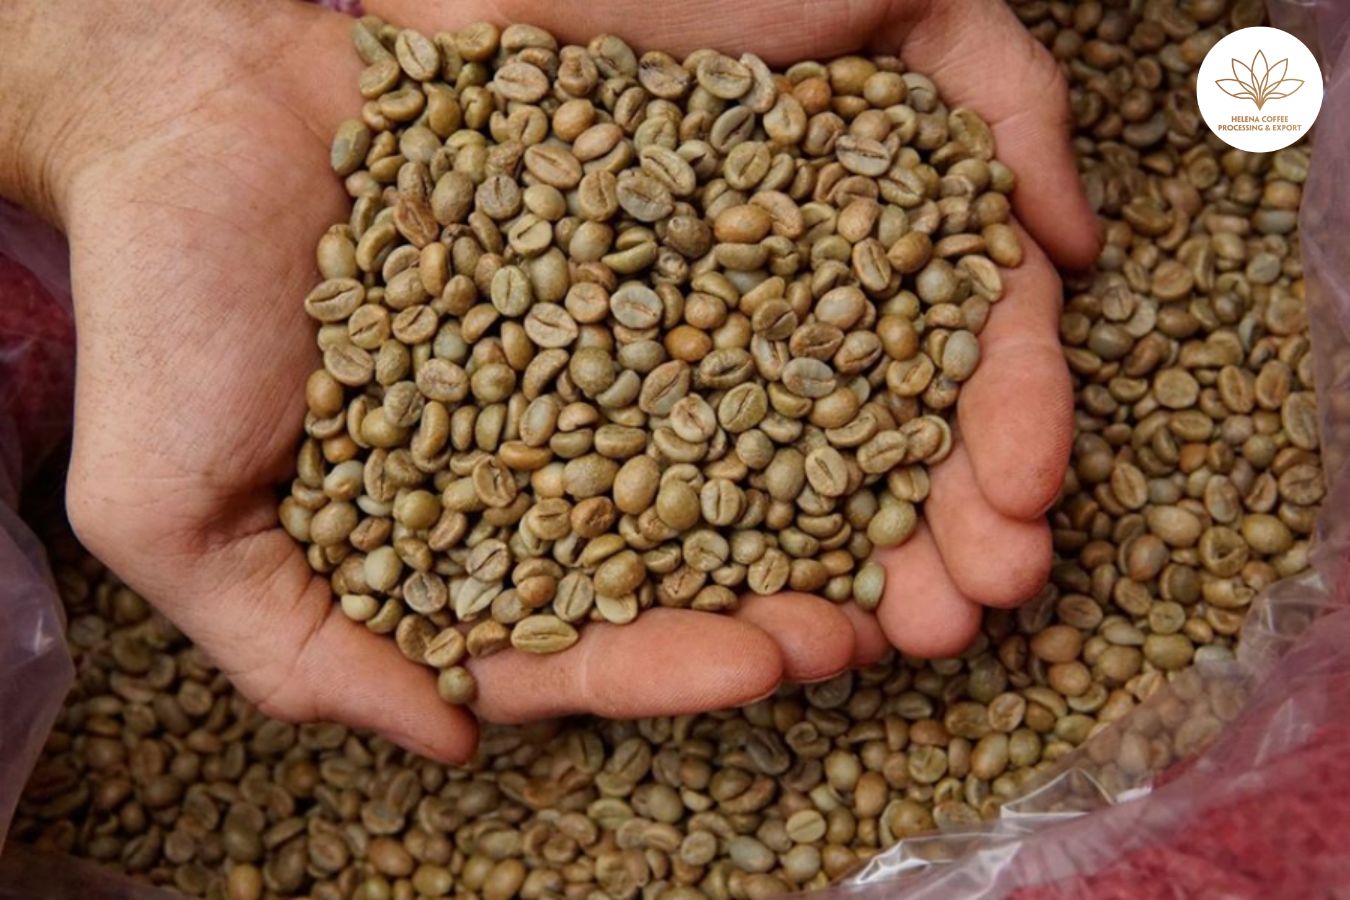 second Largest Coffee Exporter In The World